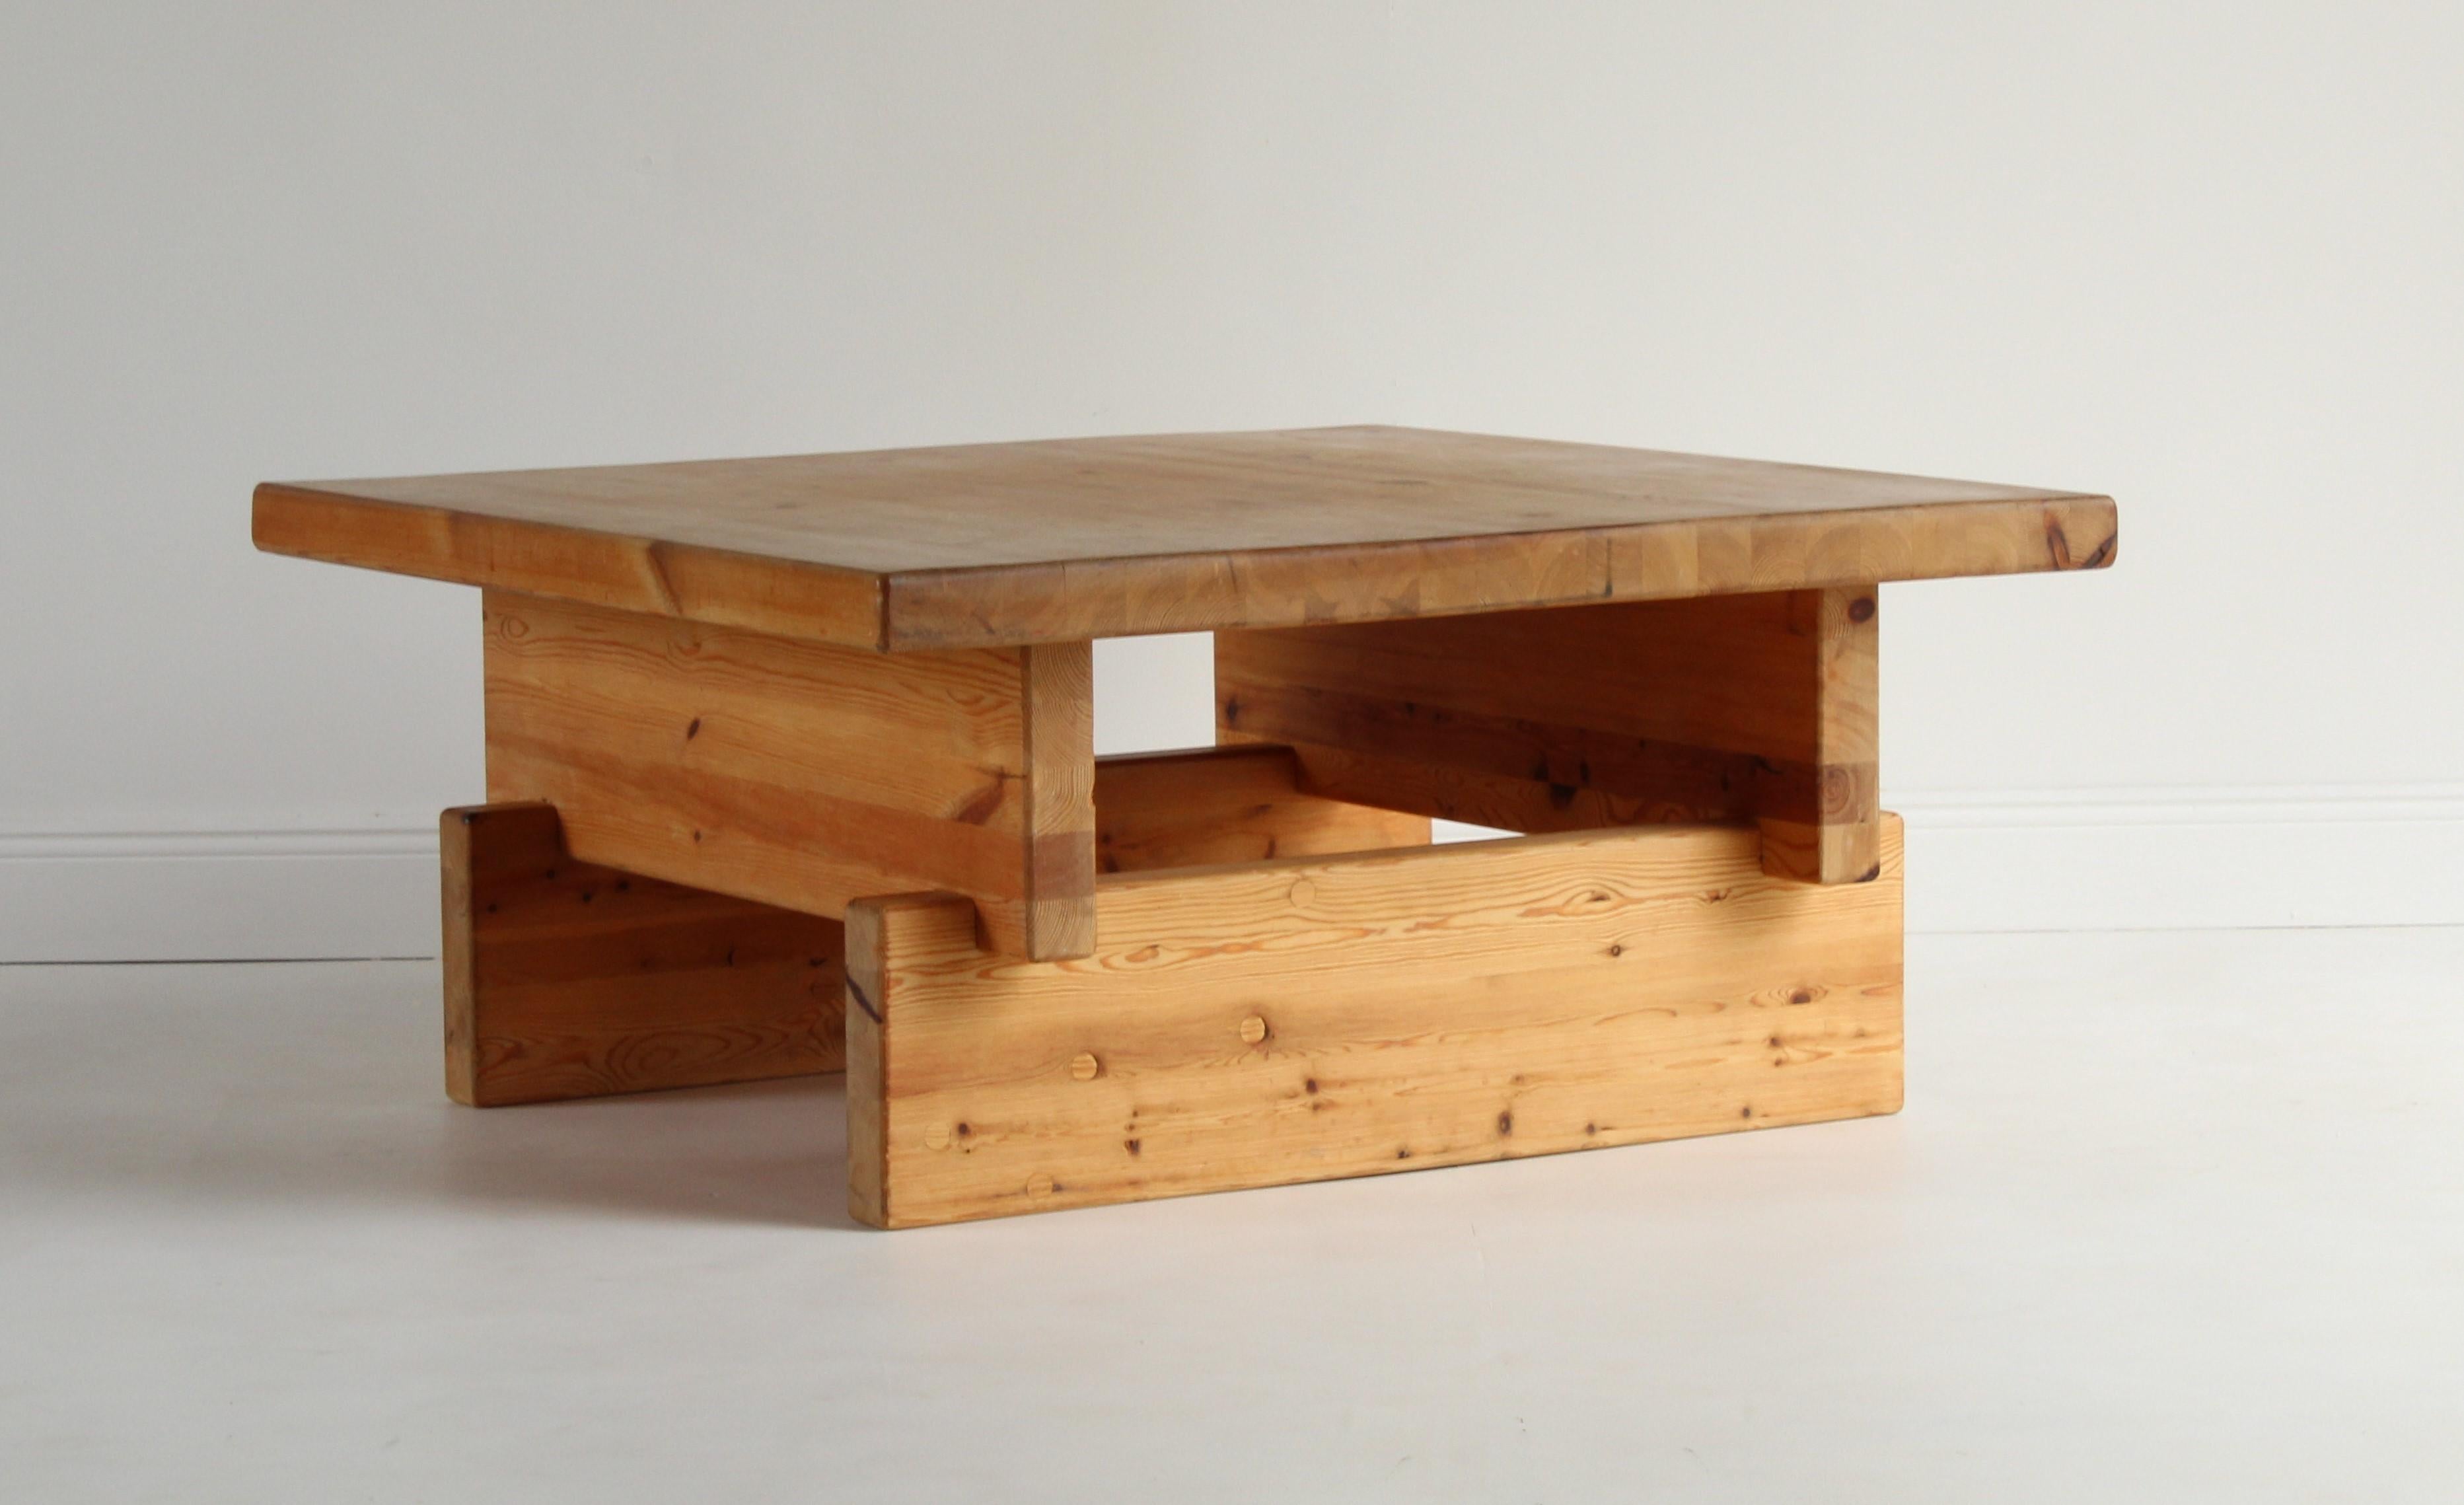 A modernist / minimalist studio coffee table. Designed by Roland Wilhelmsson. Most likely produced by Karl Andersson & Söner. Construction in sold pine blocks stacked on each other. 

Conceptually in the vein the Sportstuge-series by Axel Einar